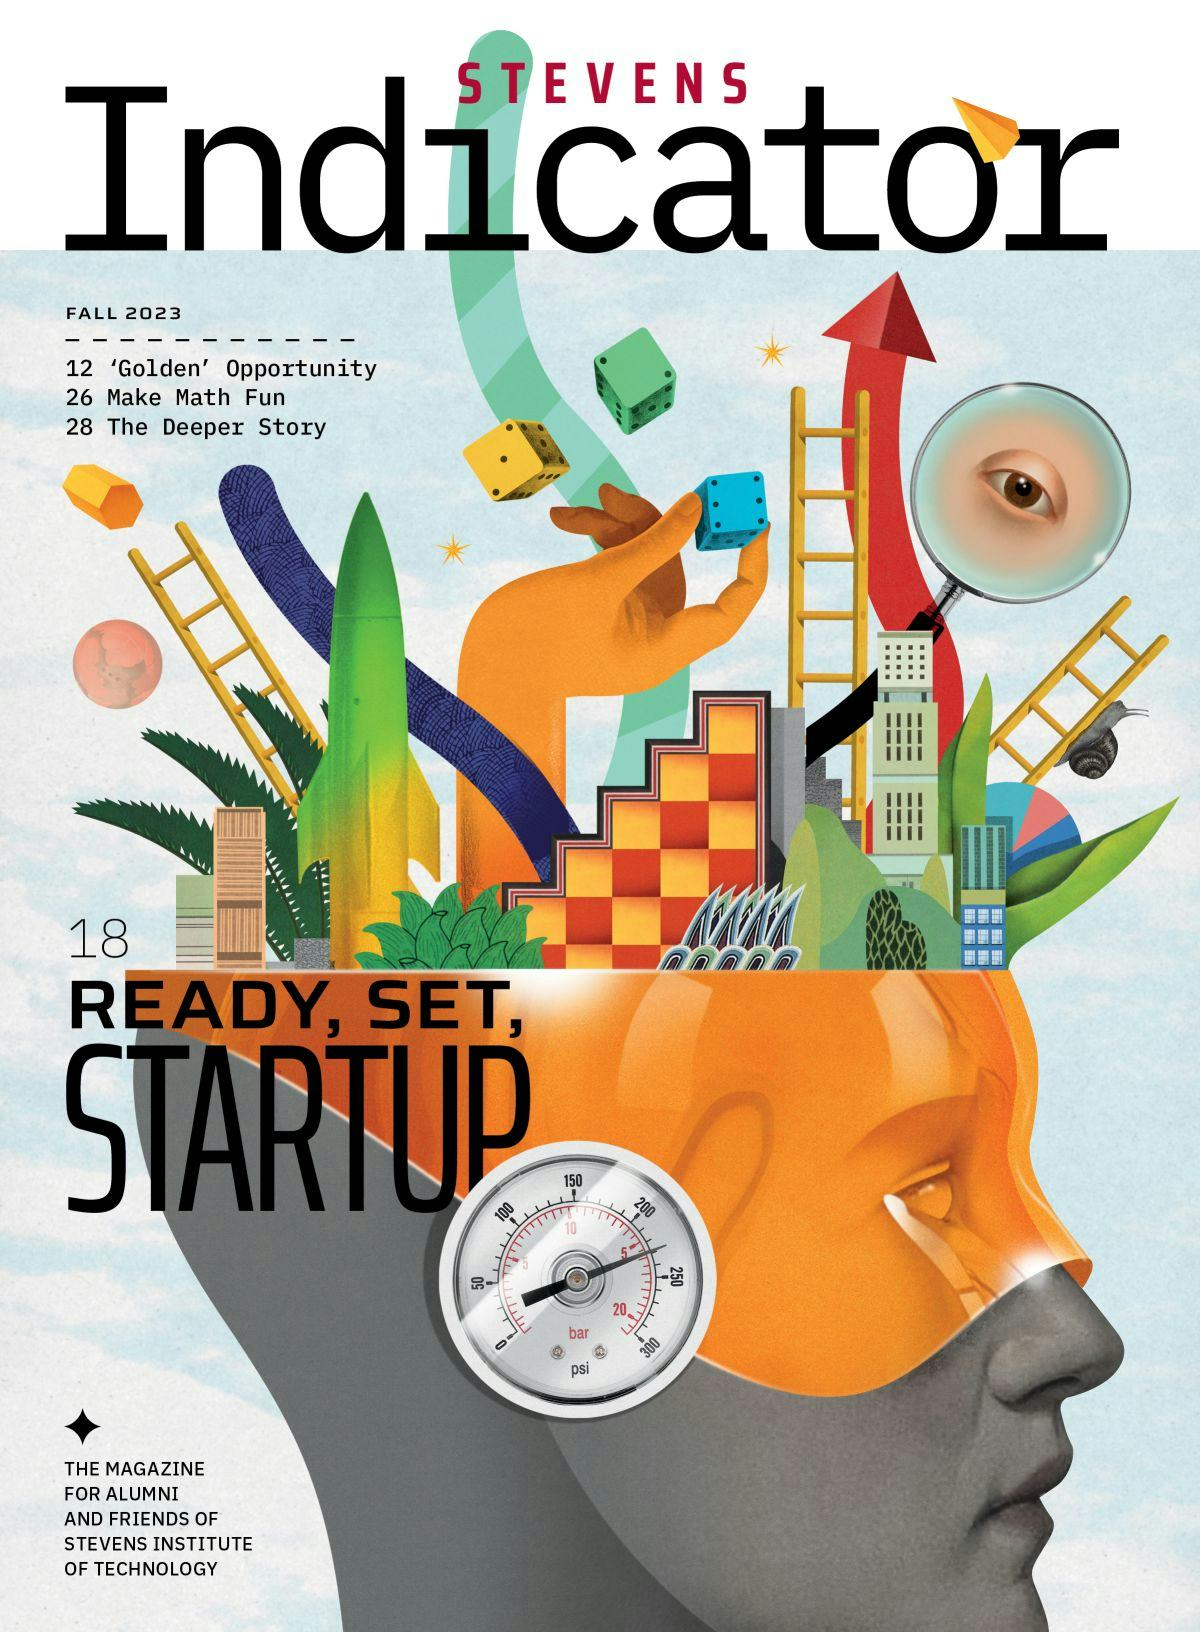 Cover of the Fall 2023 Indicator magazine